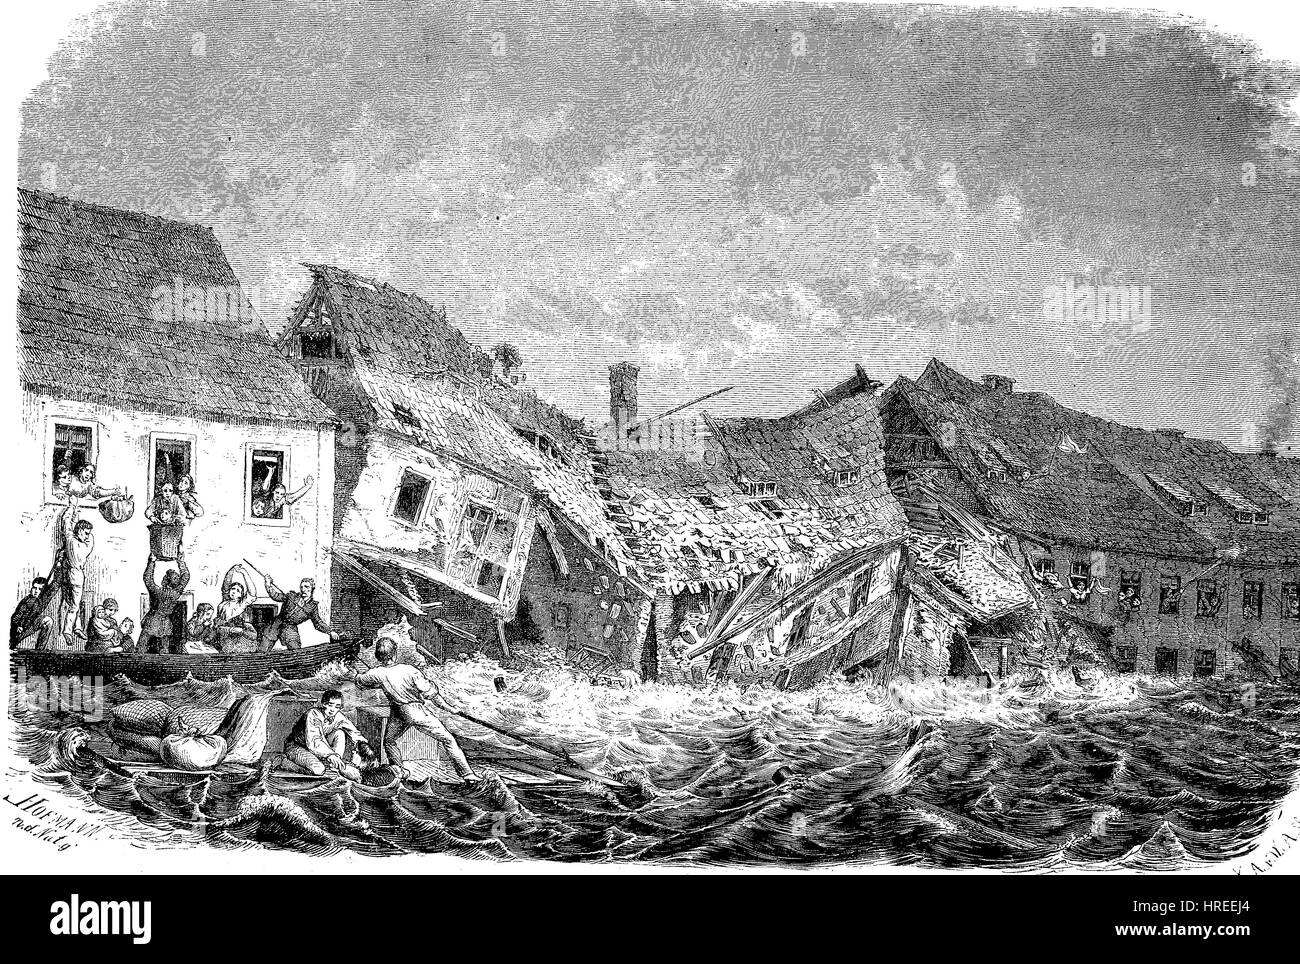 Streets in Glauchau during the flooding, Saxony, Germany, 1854, an article in The Gartenlaube, reproduction of an woodcut from the 19th century, 1885 Stock Photo